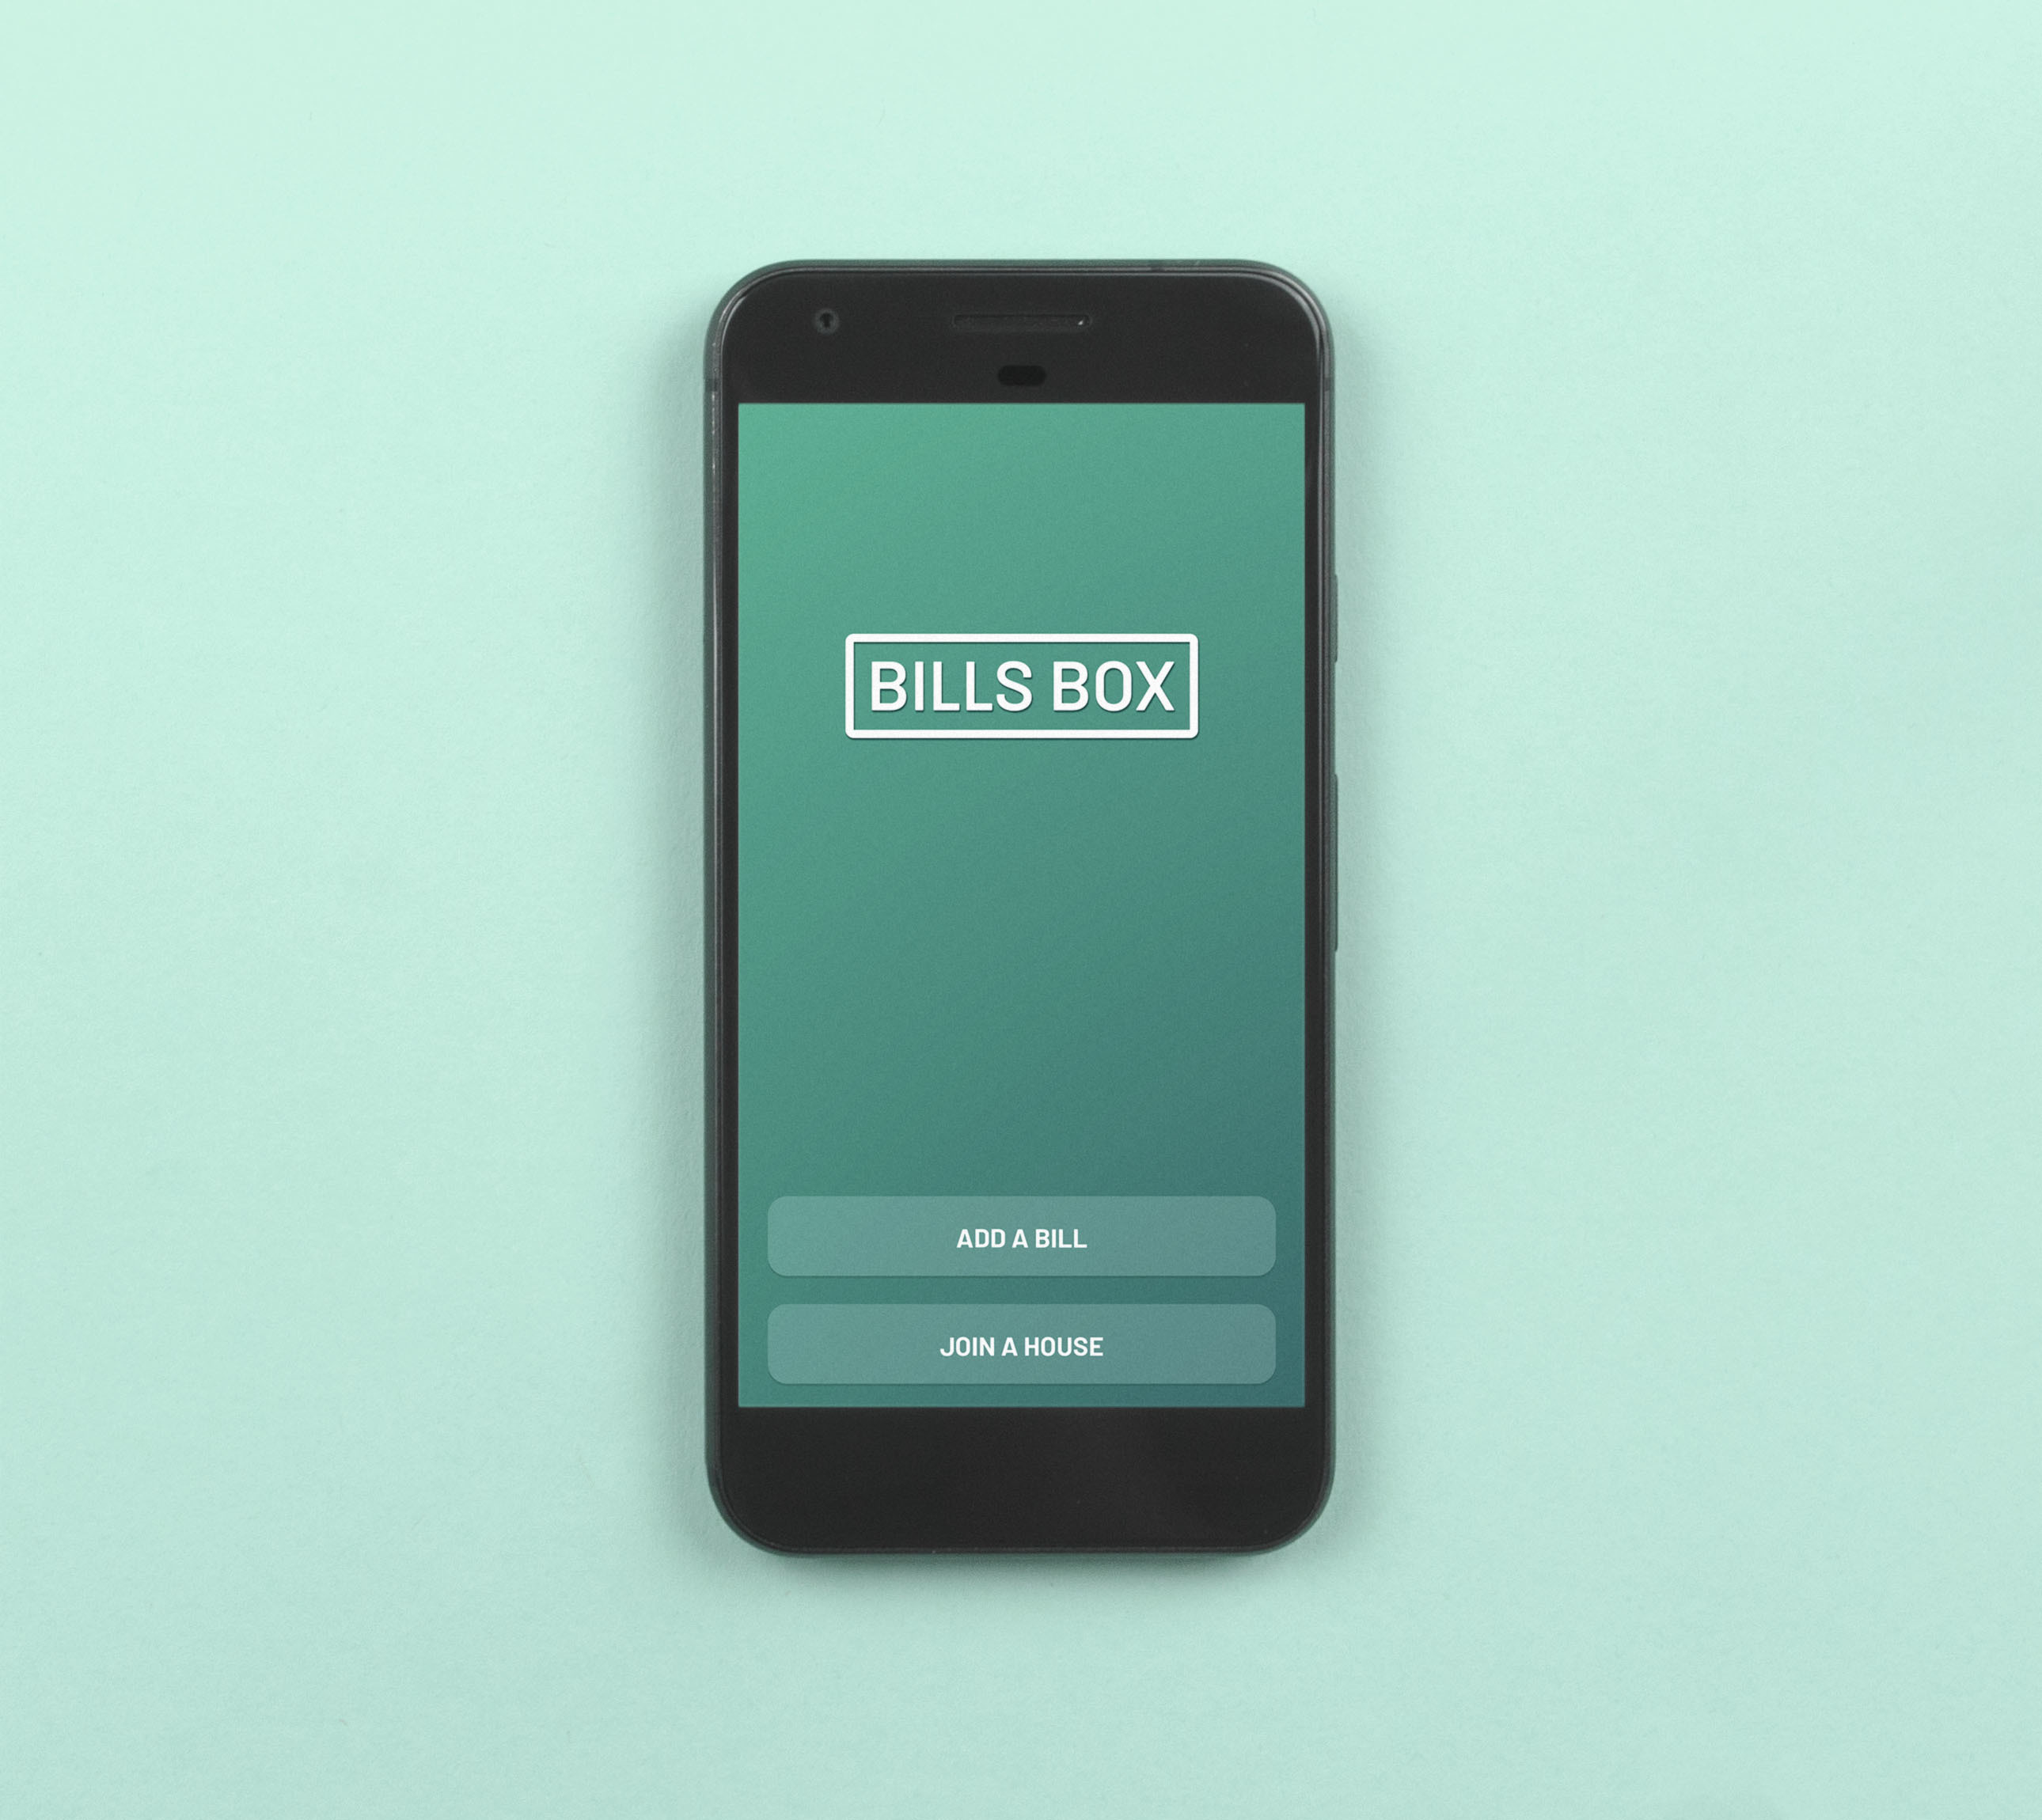 Bills box app launch screen showing ’add an account’ and ’join house’ buttons